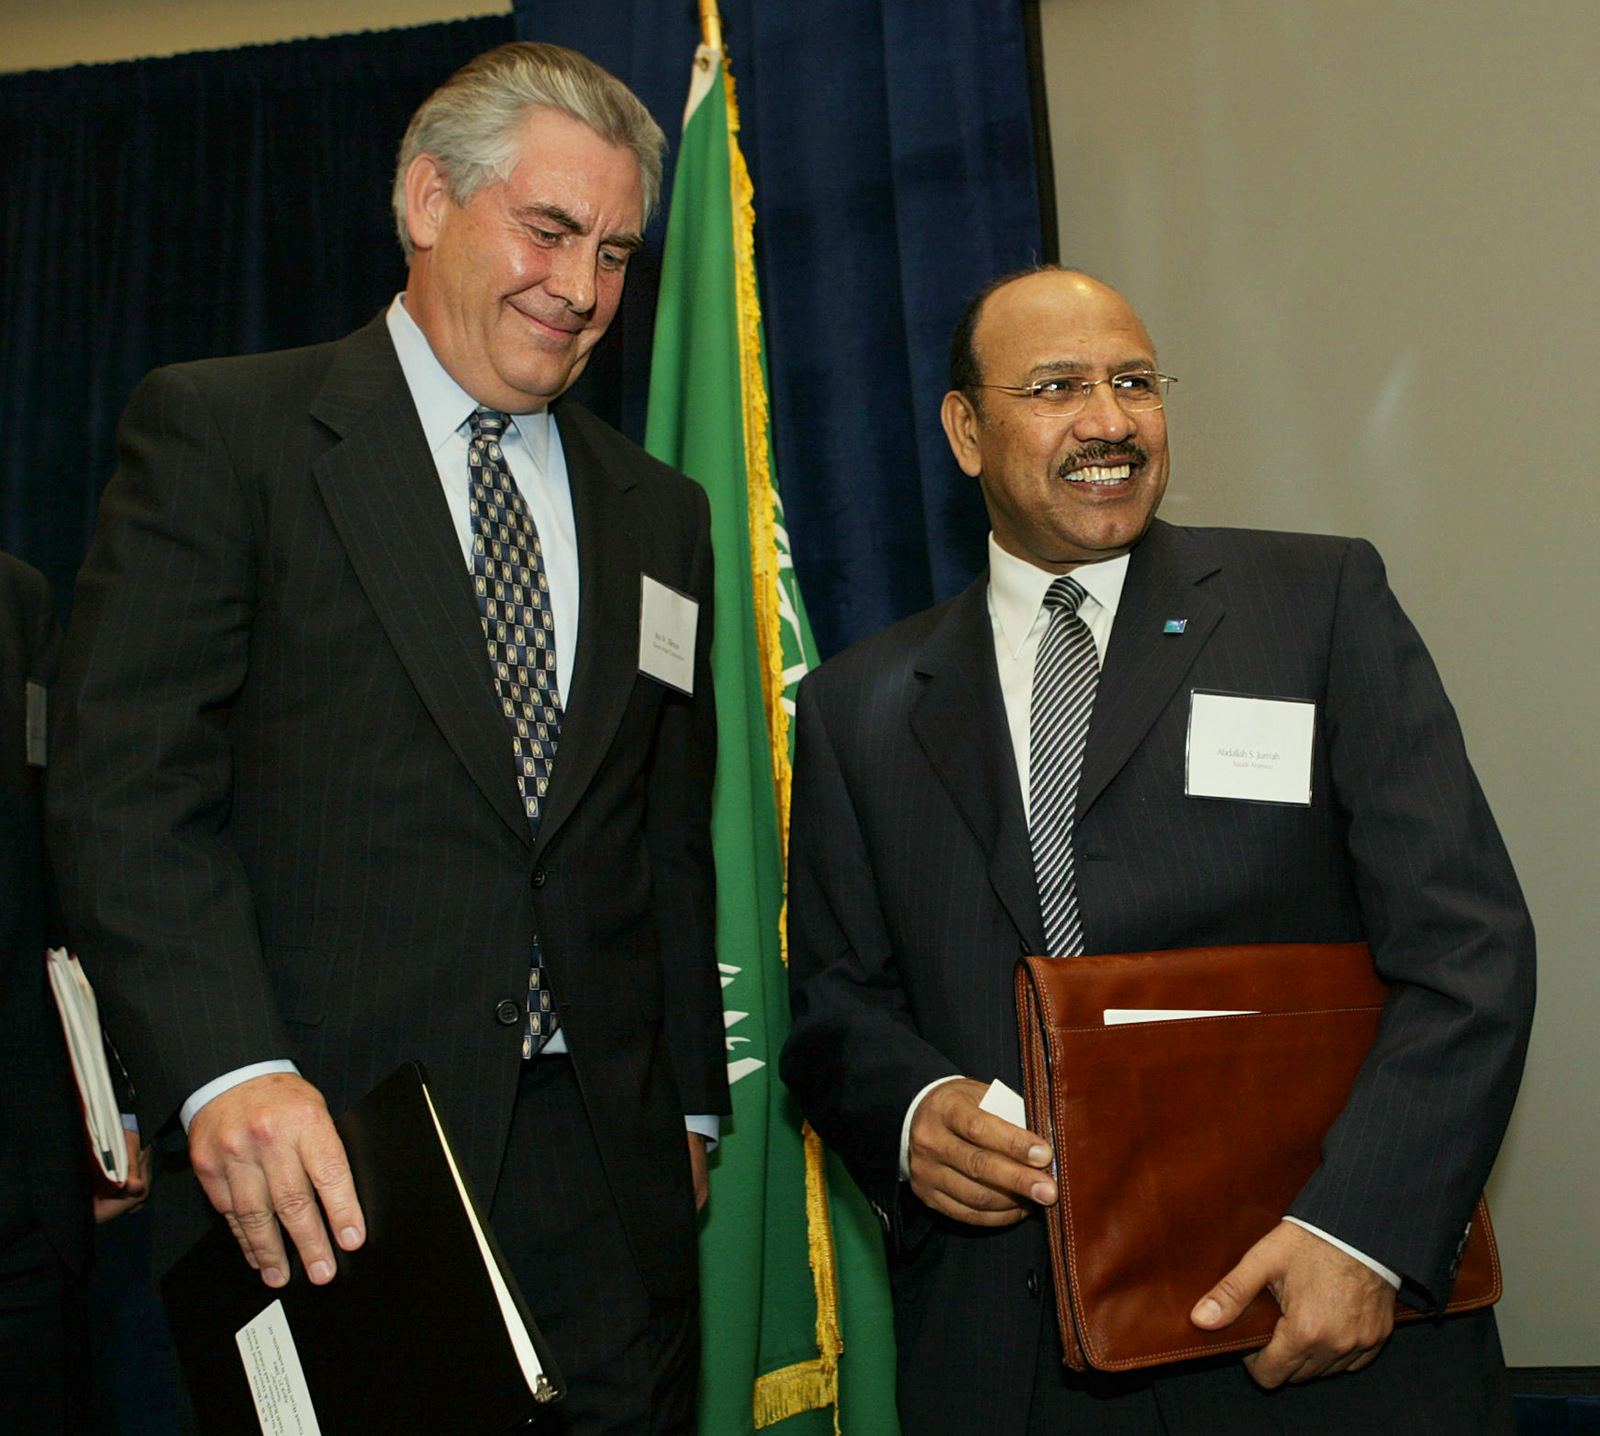 Saudi Aramco President and CEO Abdallah S. Jum'ah, right and Exxon Mobil Corporation President Rex Tillerson, attend a forum on U.S.-Saudi Relations and Global Energy Security, Tuesday, April 27, 2004, in Washington. (AP/Manuel Balce Ceneta)